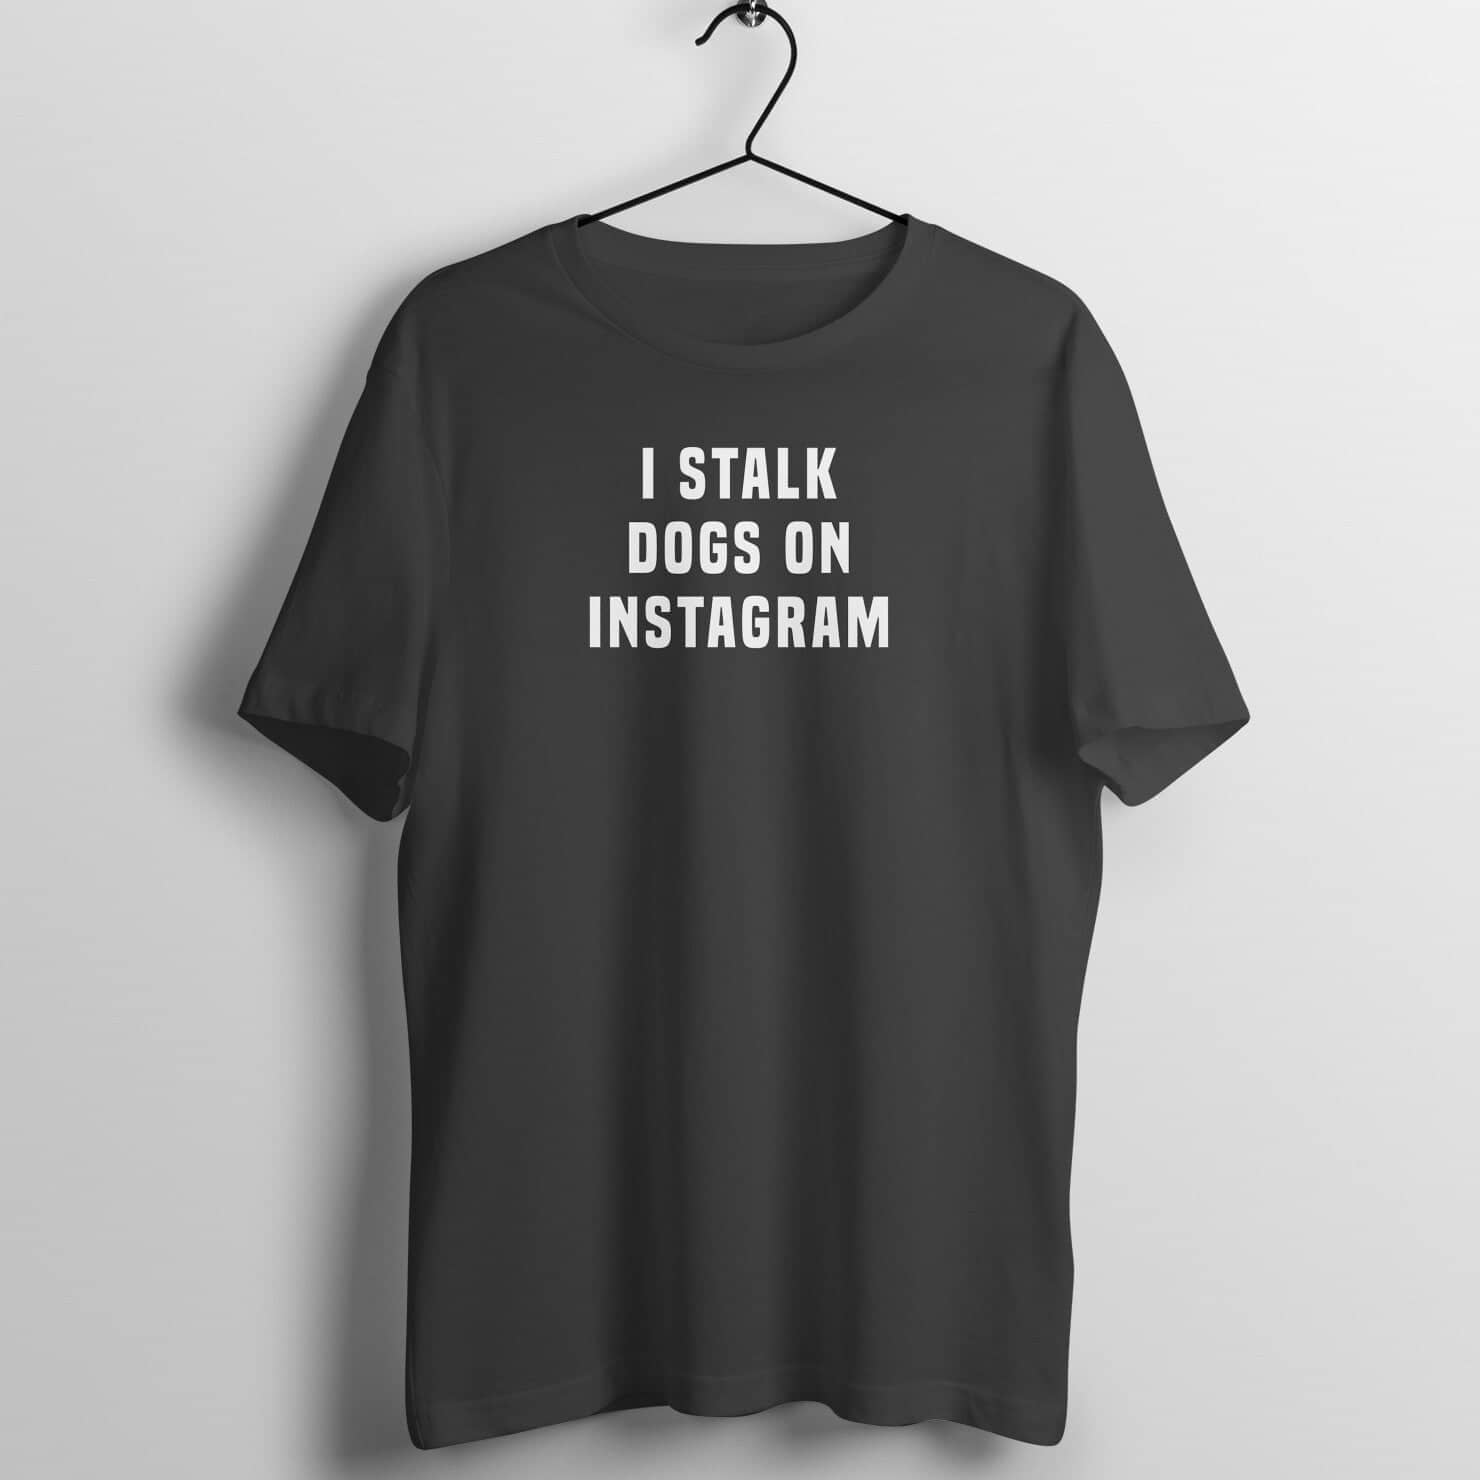 I Stalk Dogs on Instagram Exclusive Black T Shirt for Dog Lover Men and Women freeshipping - Catch My Drift India